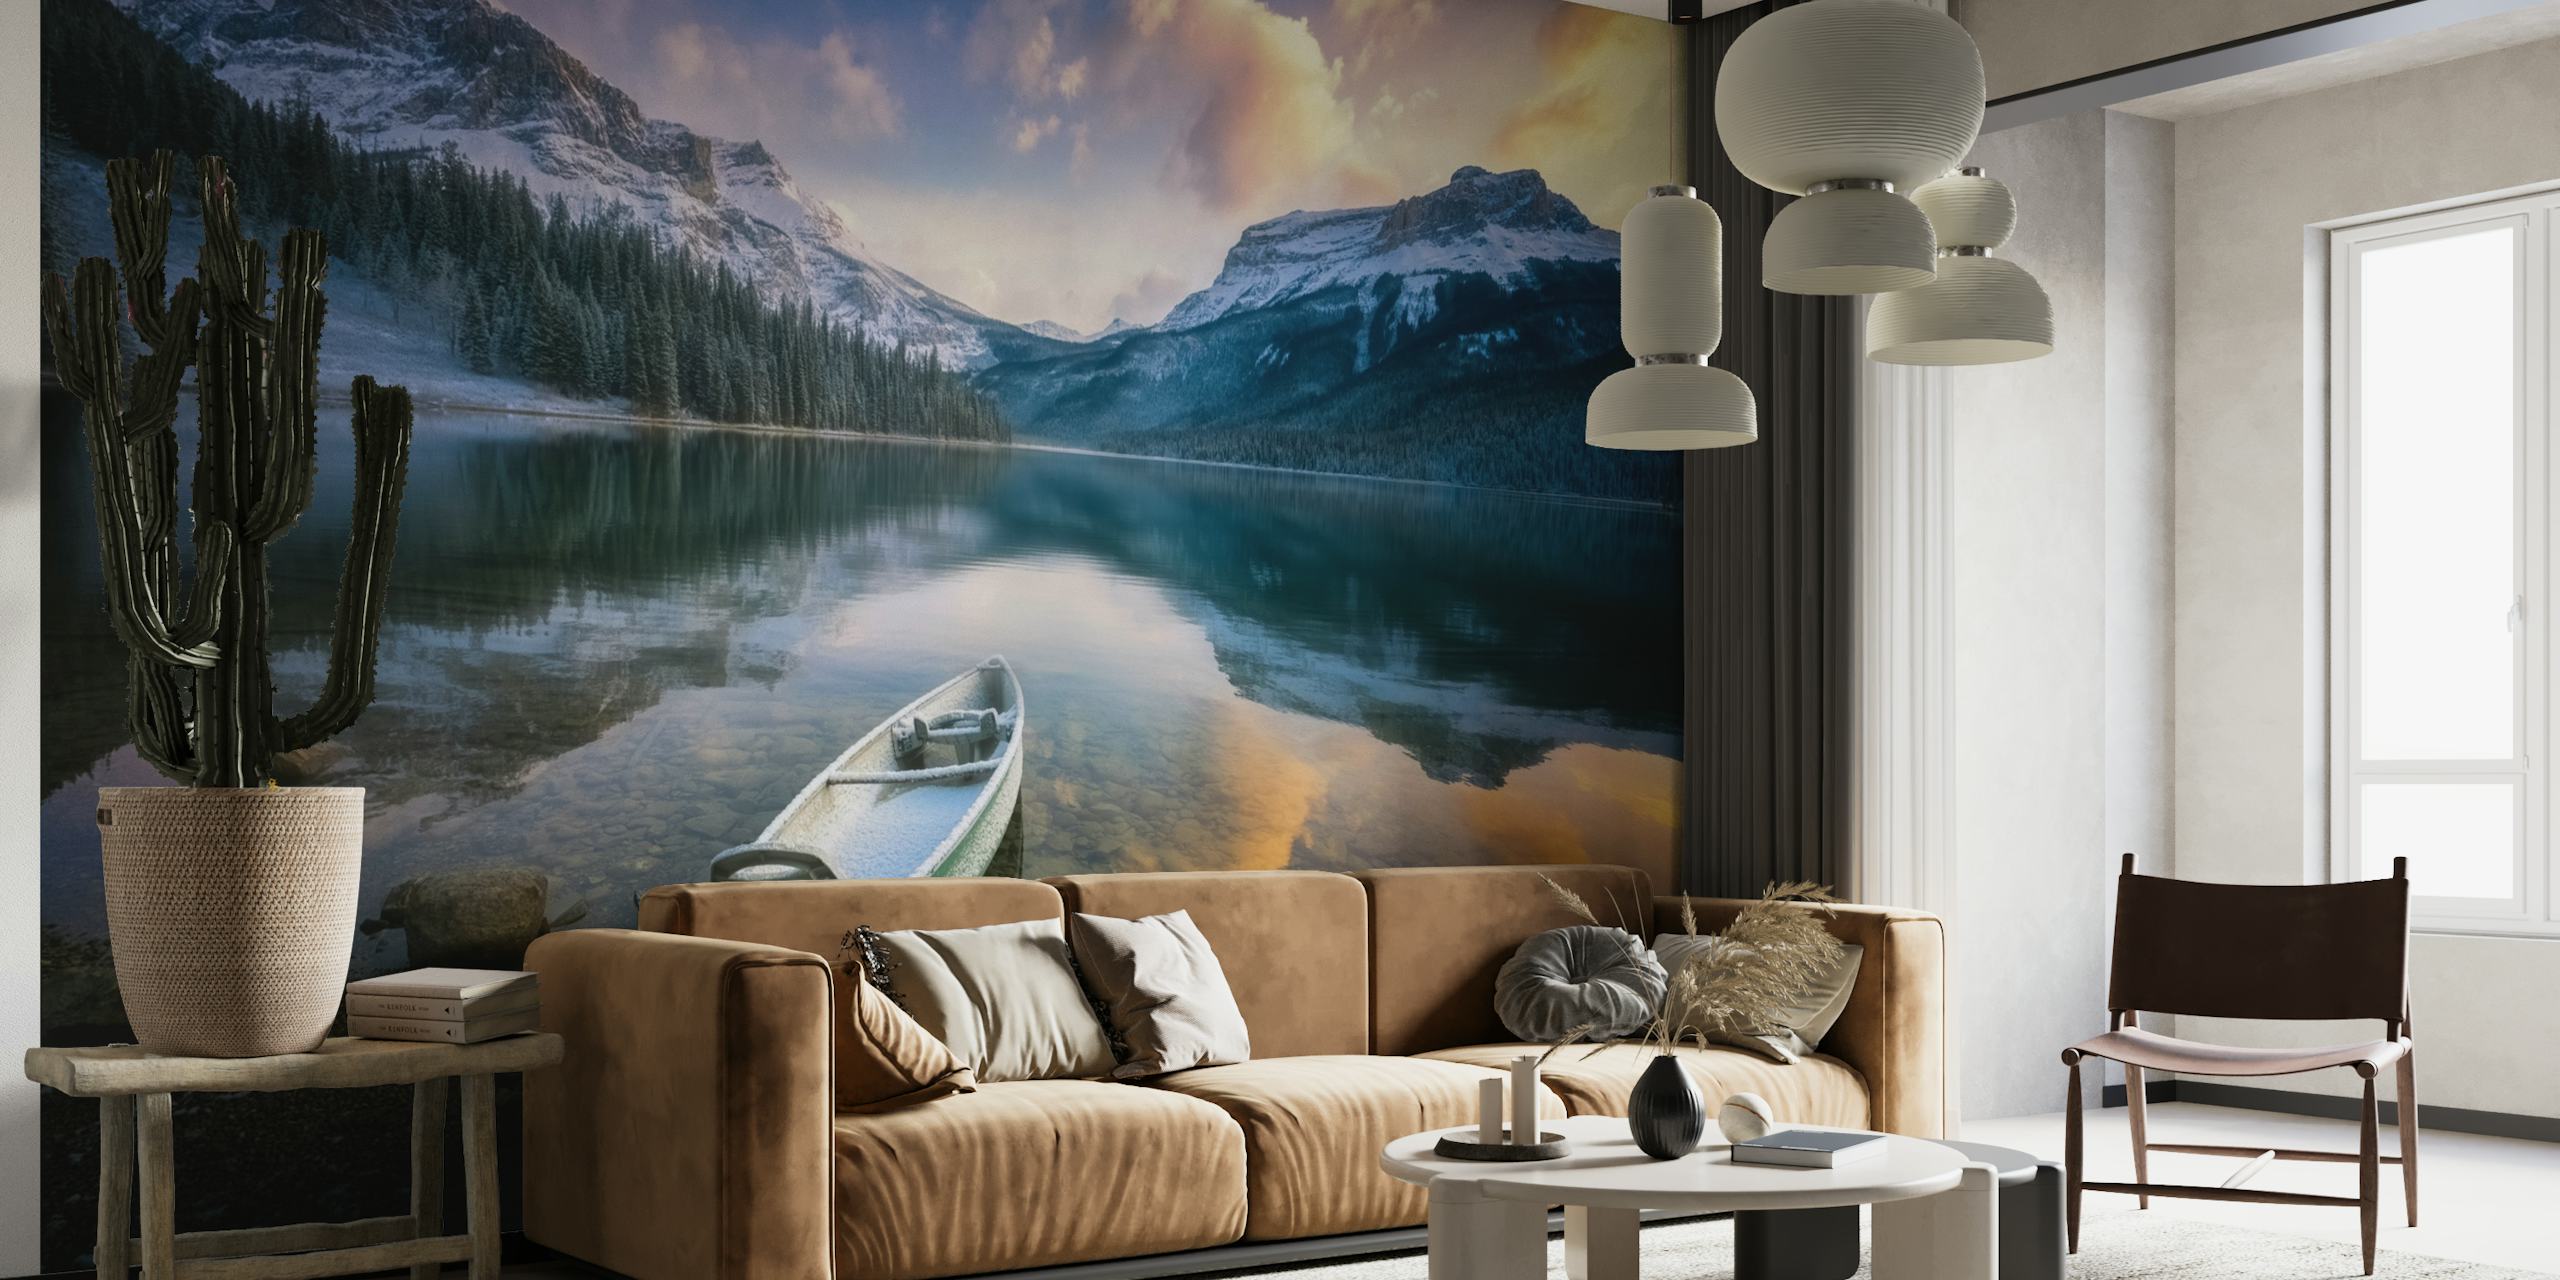 A serene lakeside wall mural with majestic mountains and a canoe, capturing the beauty of the first snowfall at Emerald Lake.